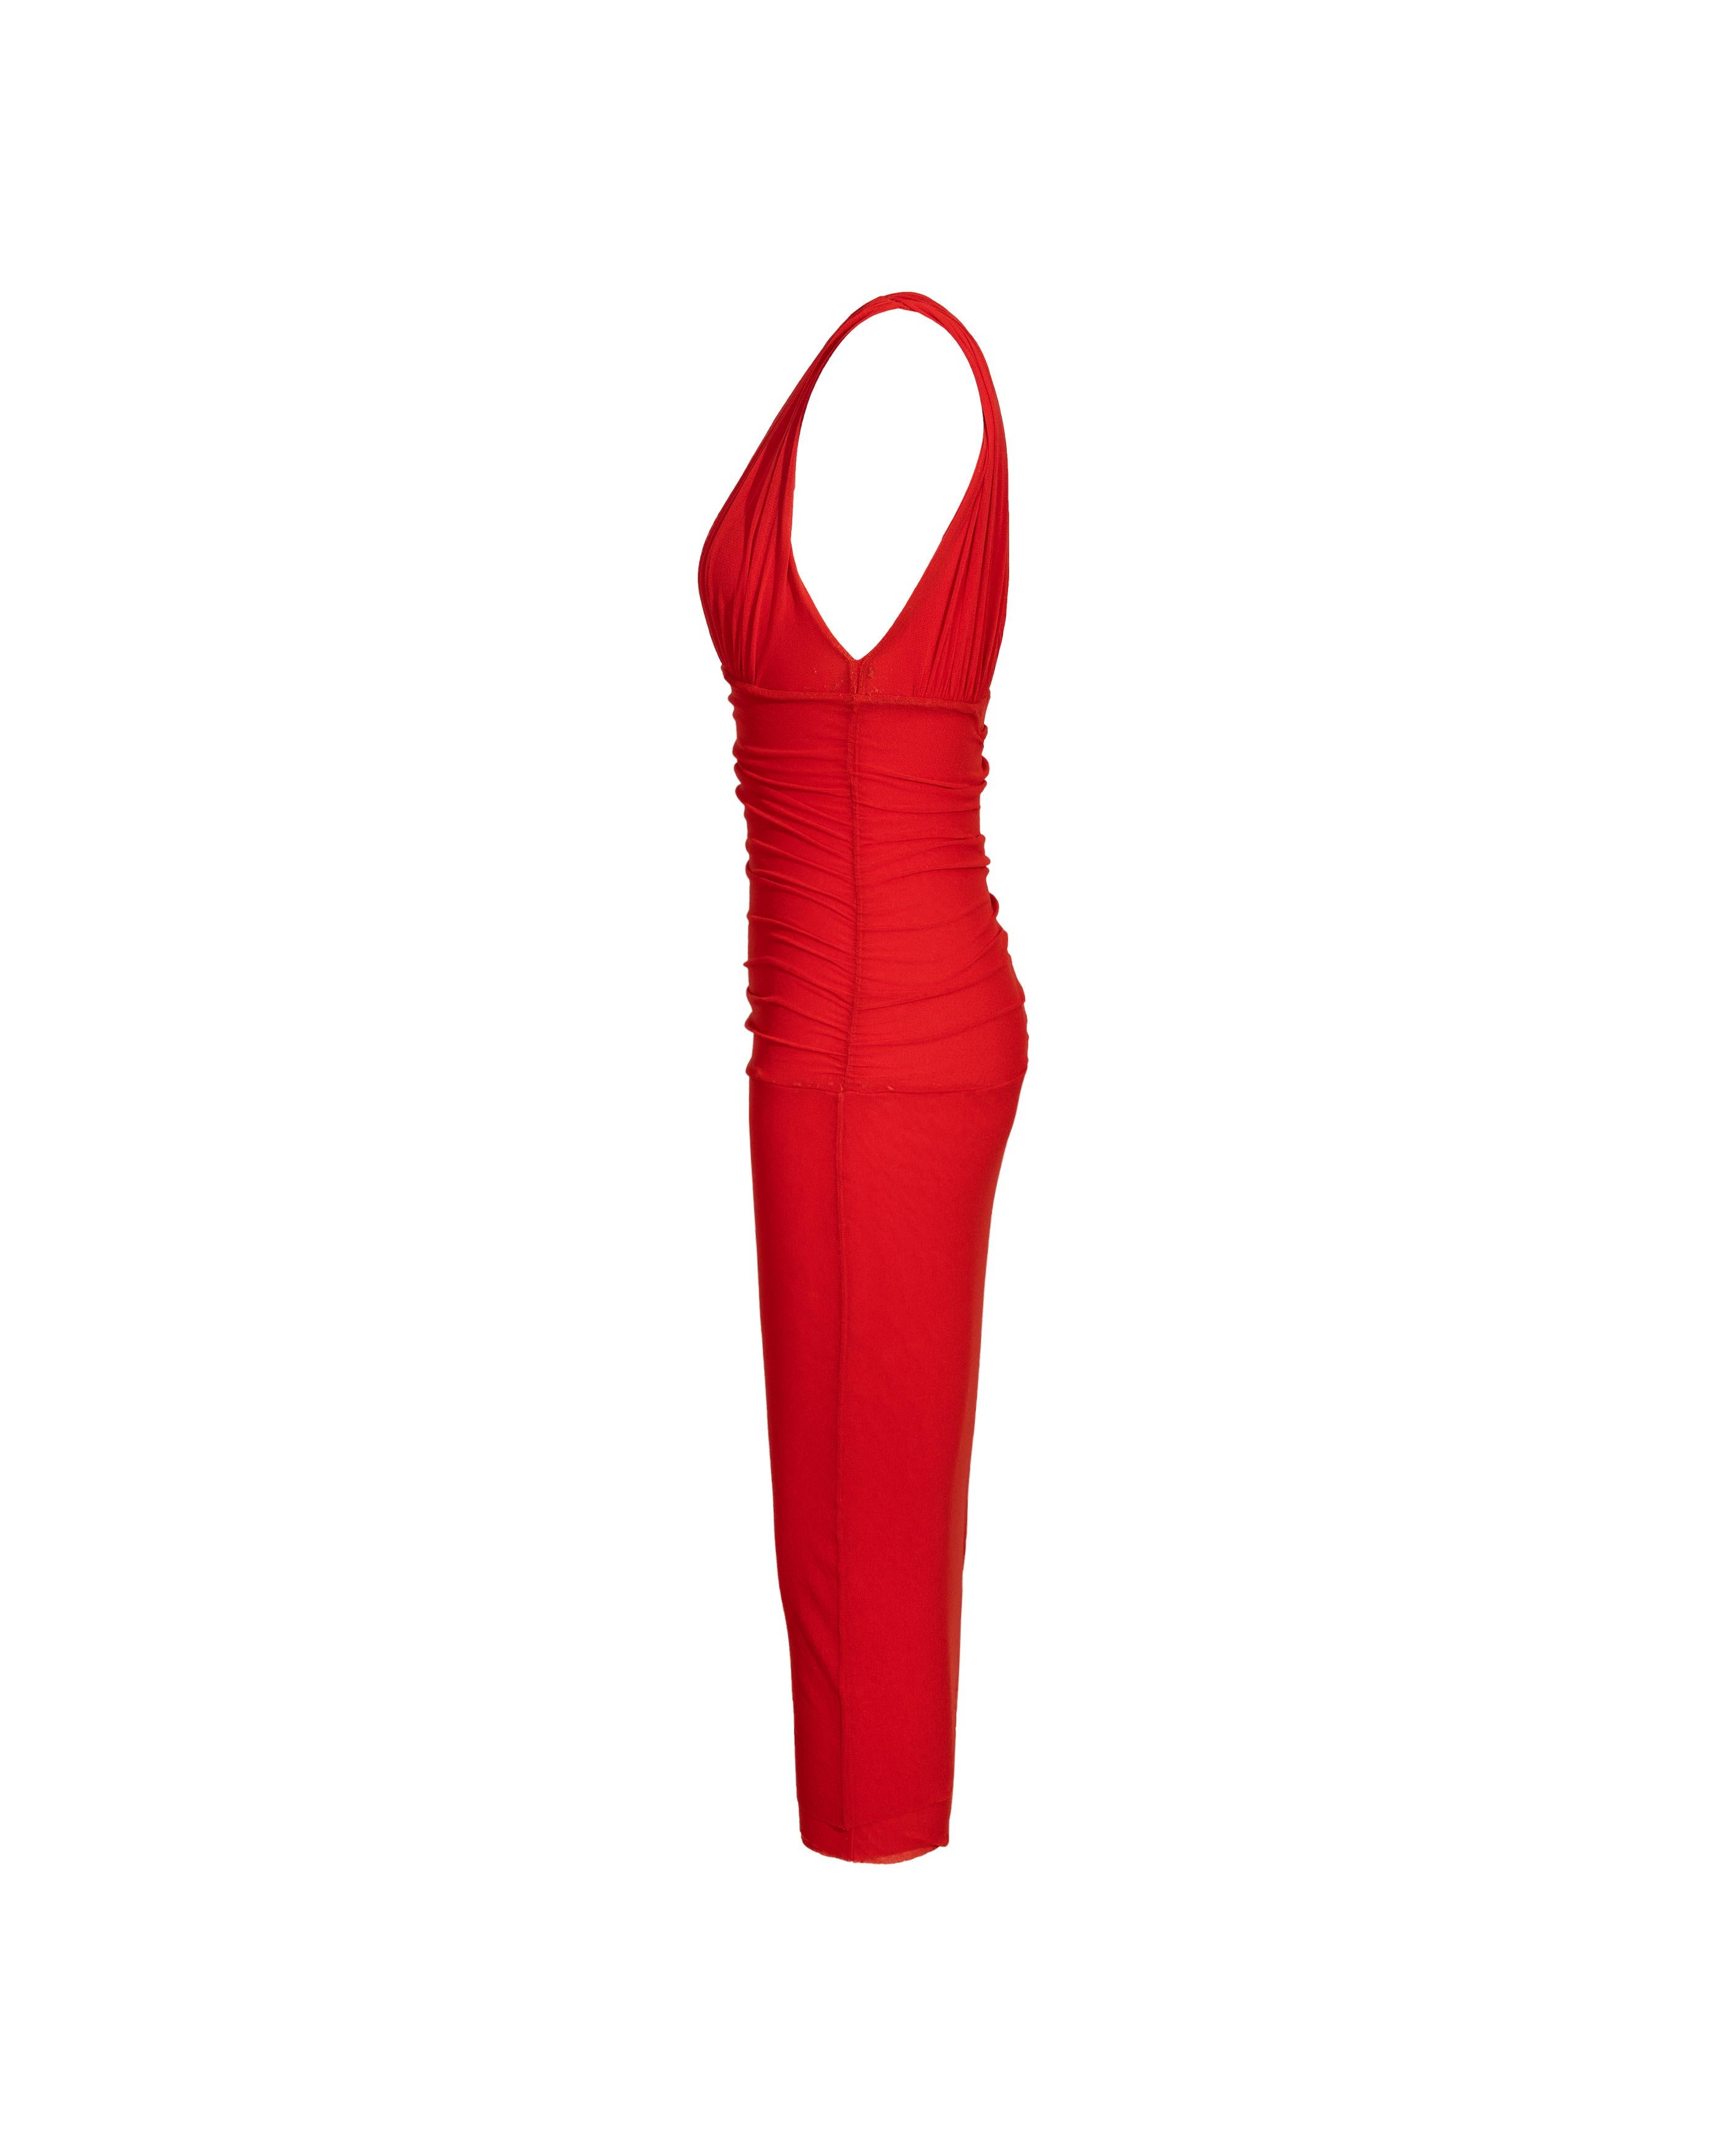 2000's Jean Paul Gaultier 'Soleil' Red Below-Knee Sleeveless Dress In Good Condition For Sale In North Hollywood, CA